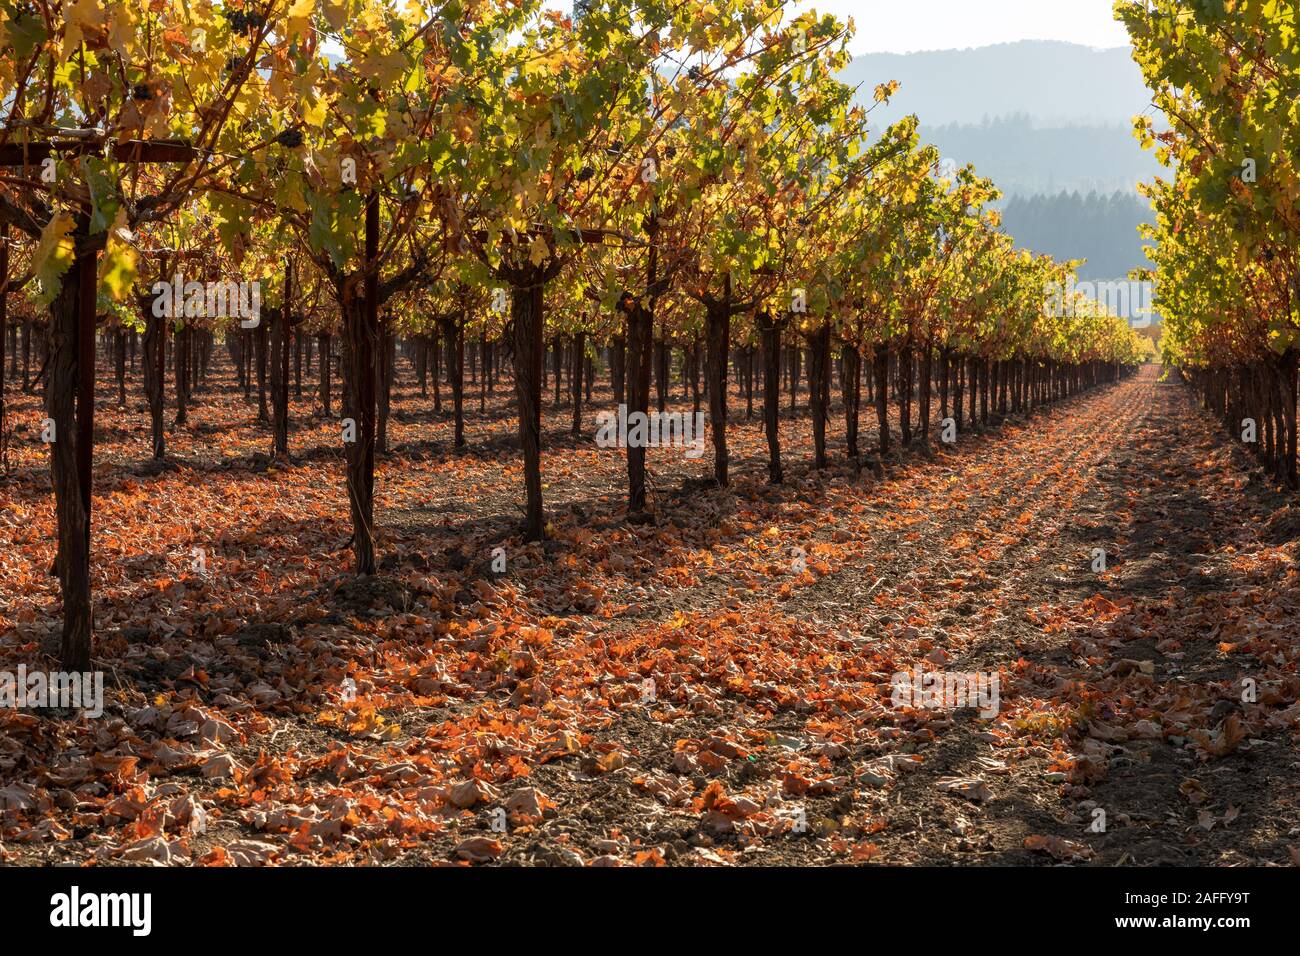 Rows of vines in an autumn vineyard Stock Photo